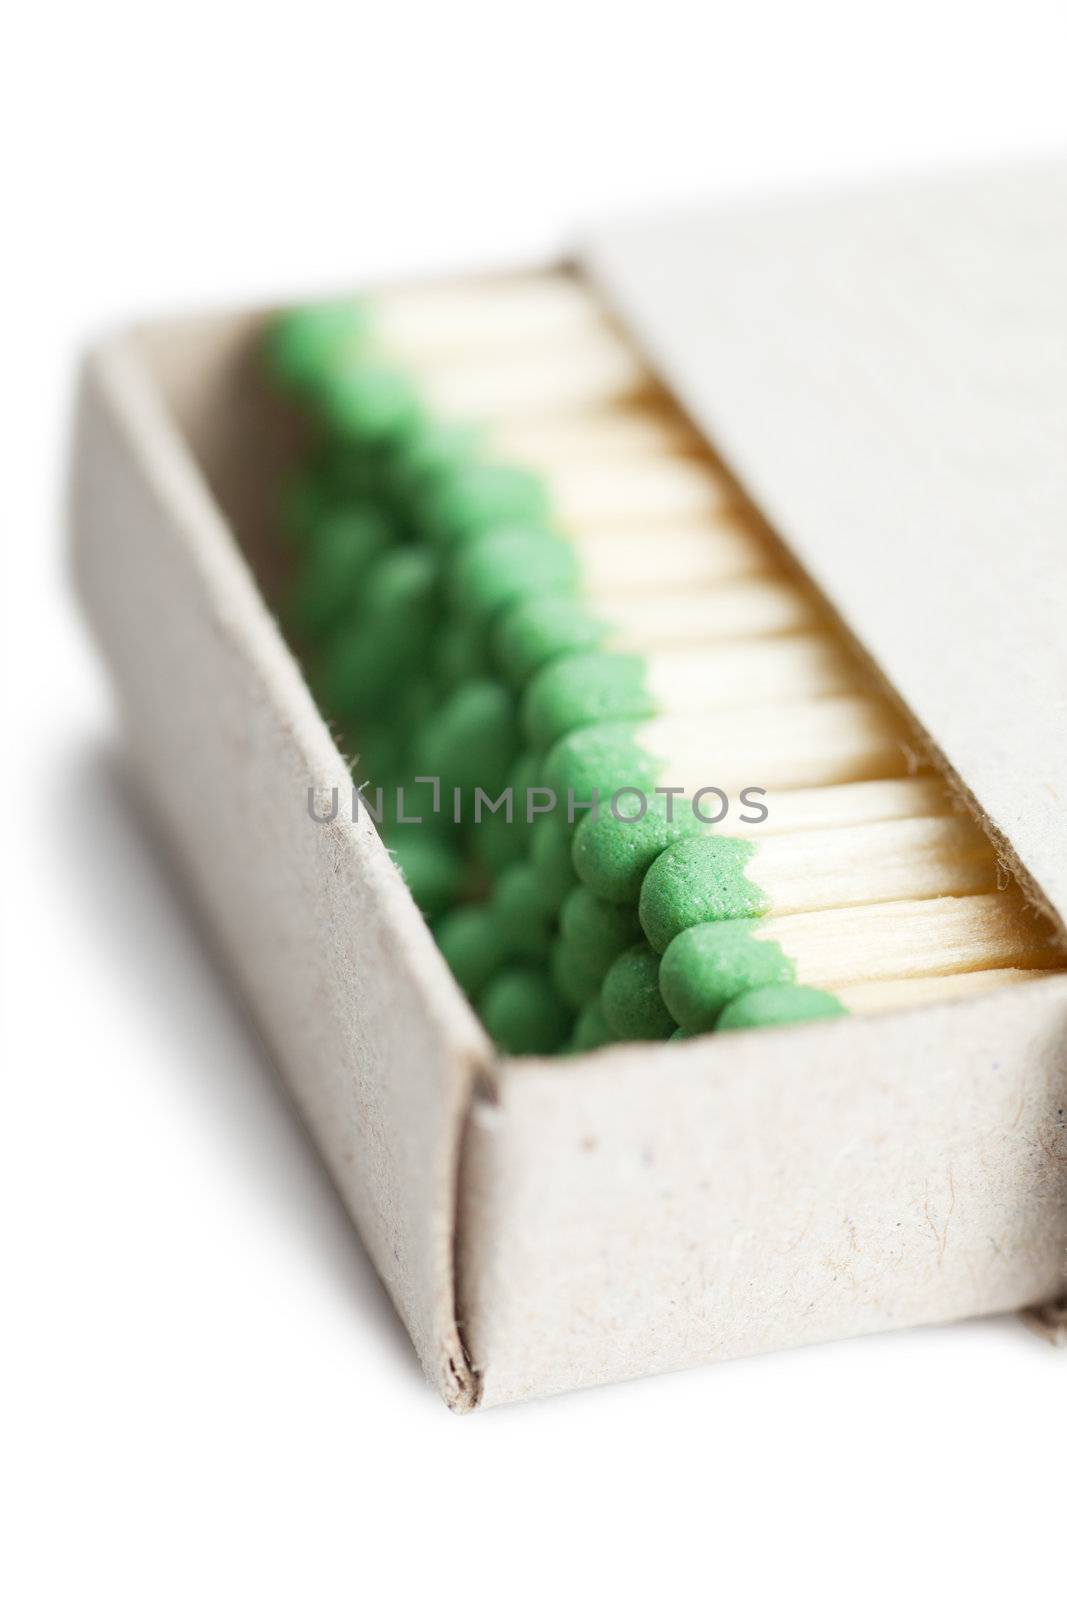 Matches in a box by AGorohov